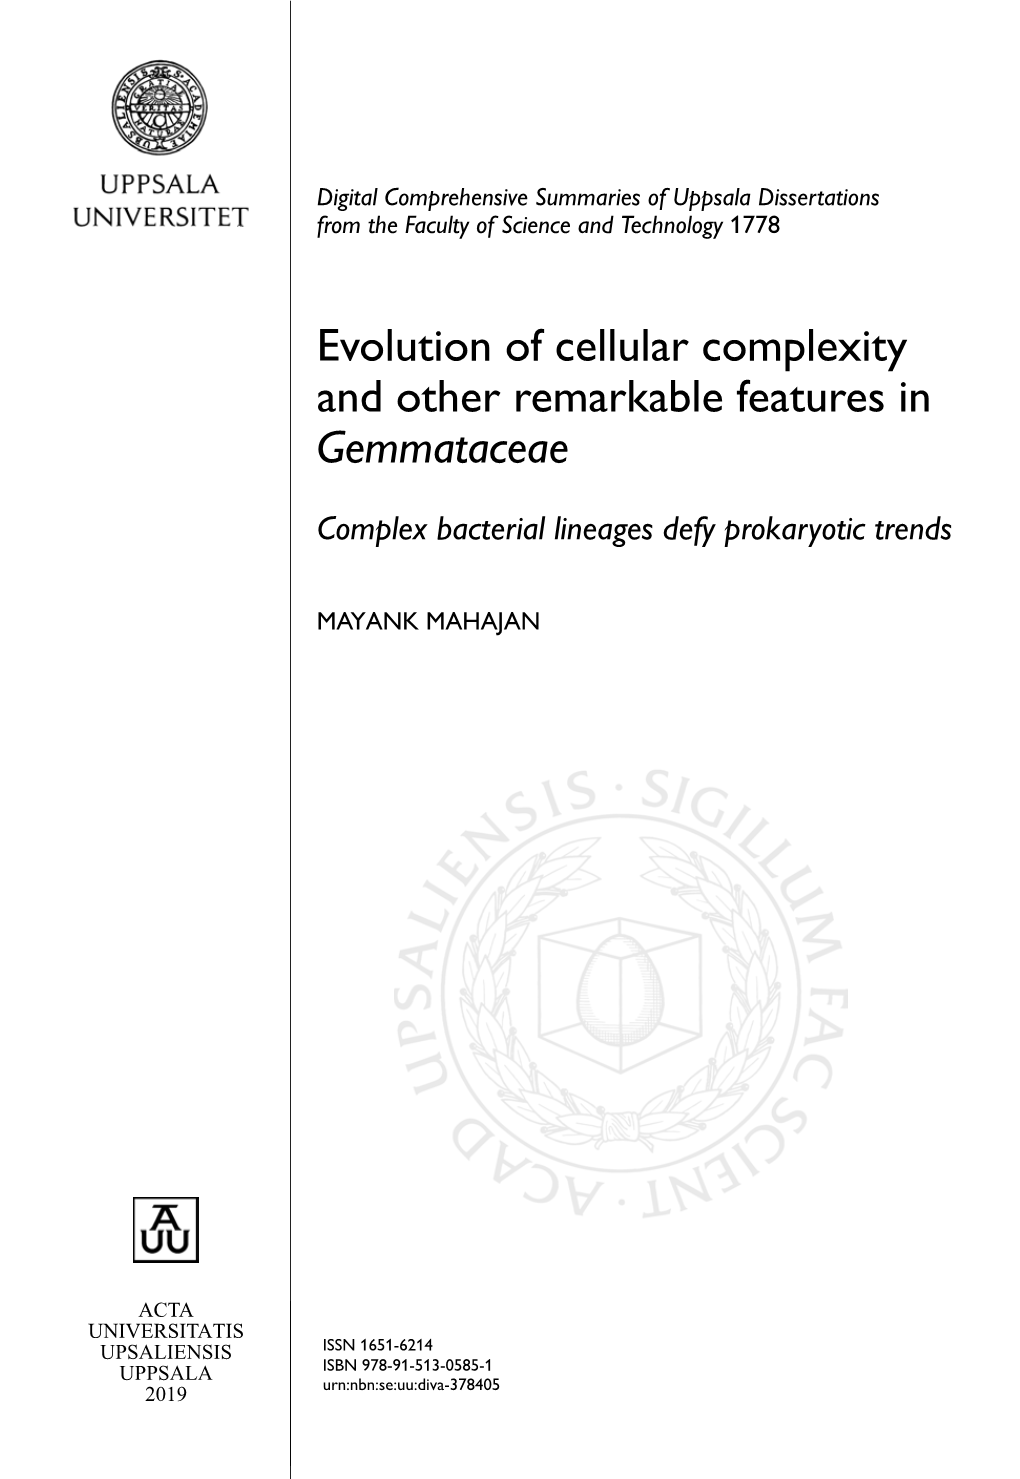 Evolution of Cellular Complexity and Other Remarkable Features in Gemmataceae